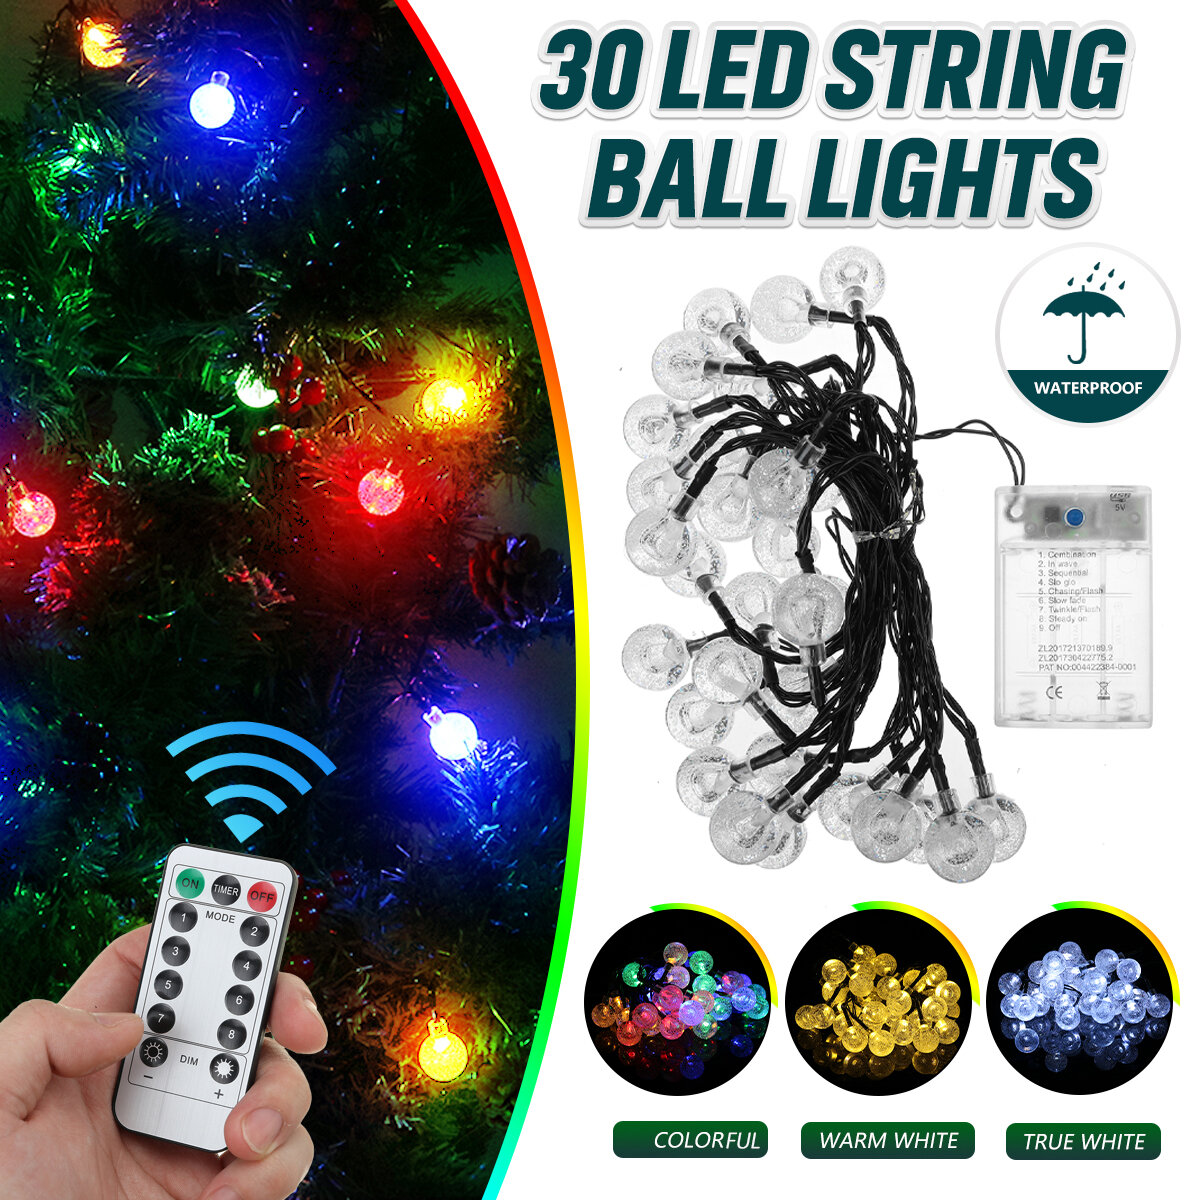 

6.5M 30LED Ball String Light Outdoor Christmas Garden Party Wedding Decor Waterproof+Remote Control